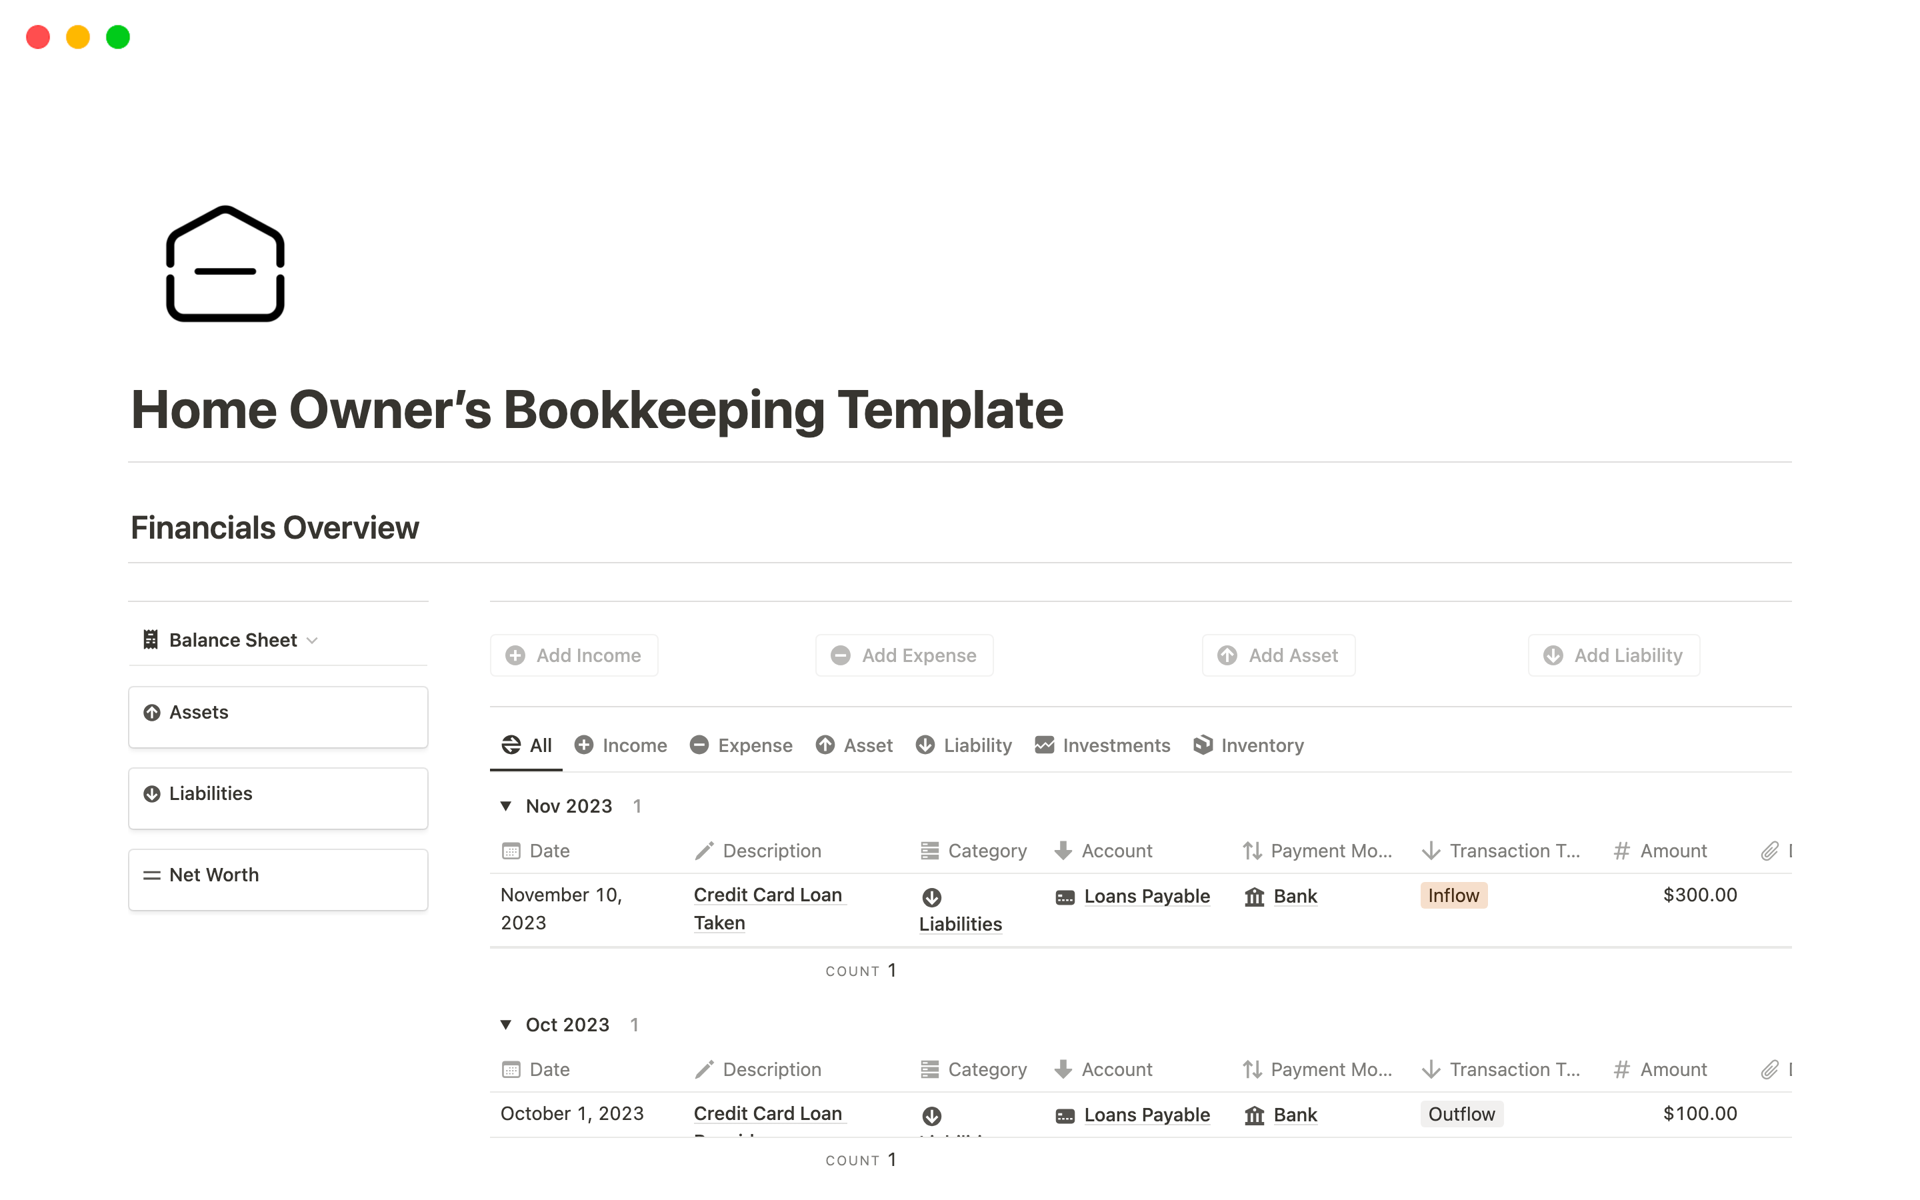 This bookkeeping template provides best solution for Home Owners Association to manage their business finances, produce income statement, balance sheet, cash flow statement and much more on a periodical basis.